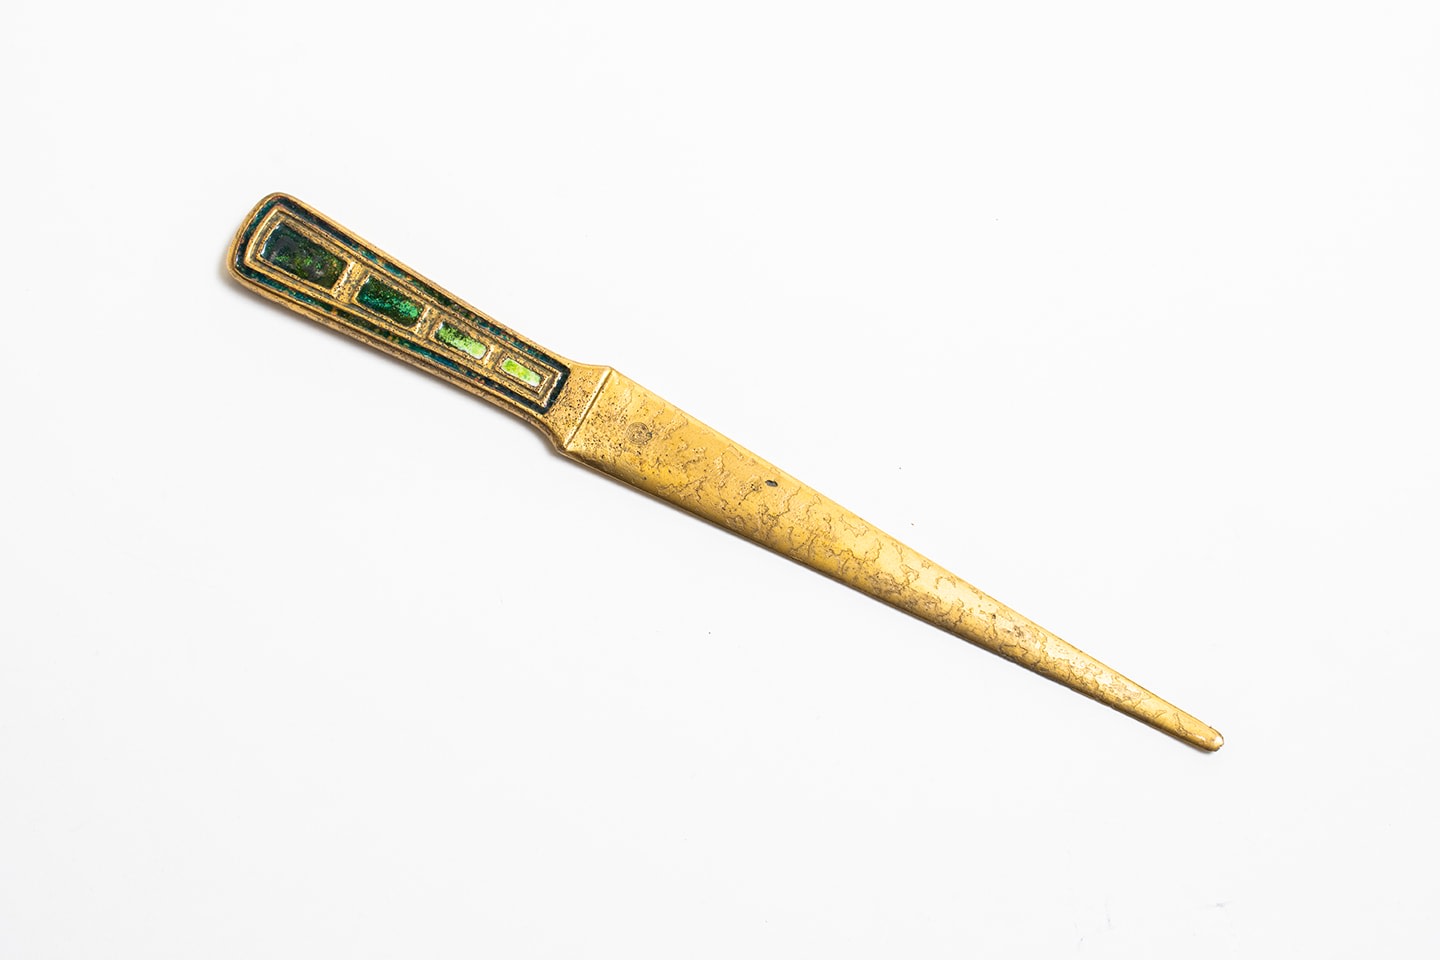 a gilt bronze letter opener or paper knife by louis c tiffany furnaces inc, a successor to tiffany studios, with a handle decorated with inset variegated green enamel in rectangular recesses.